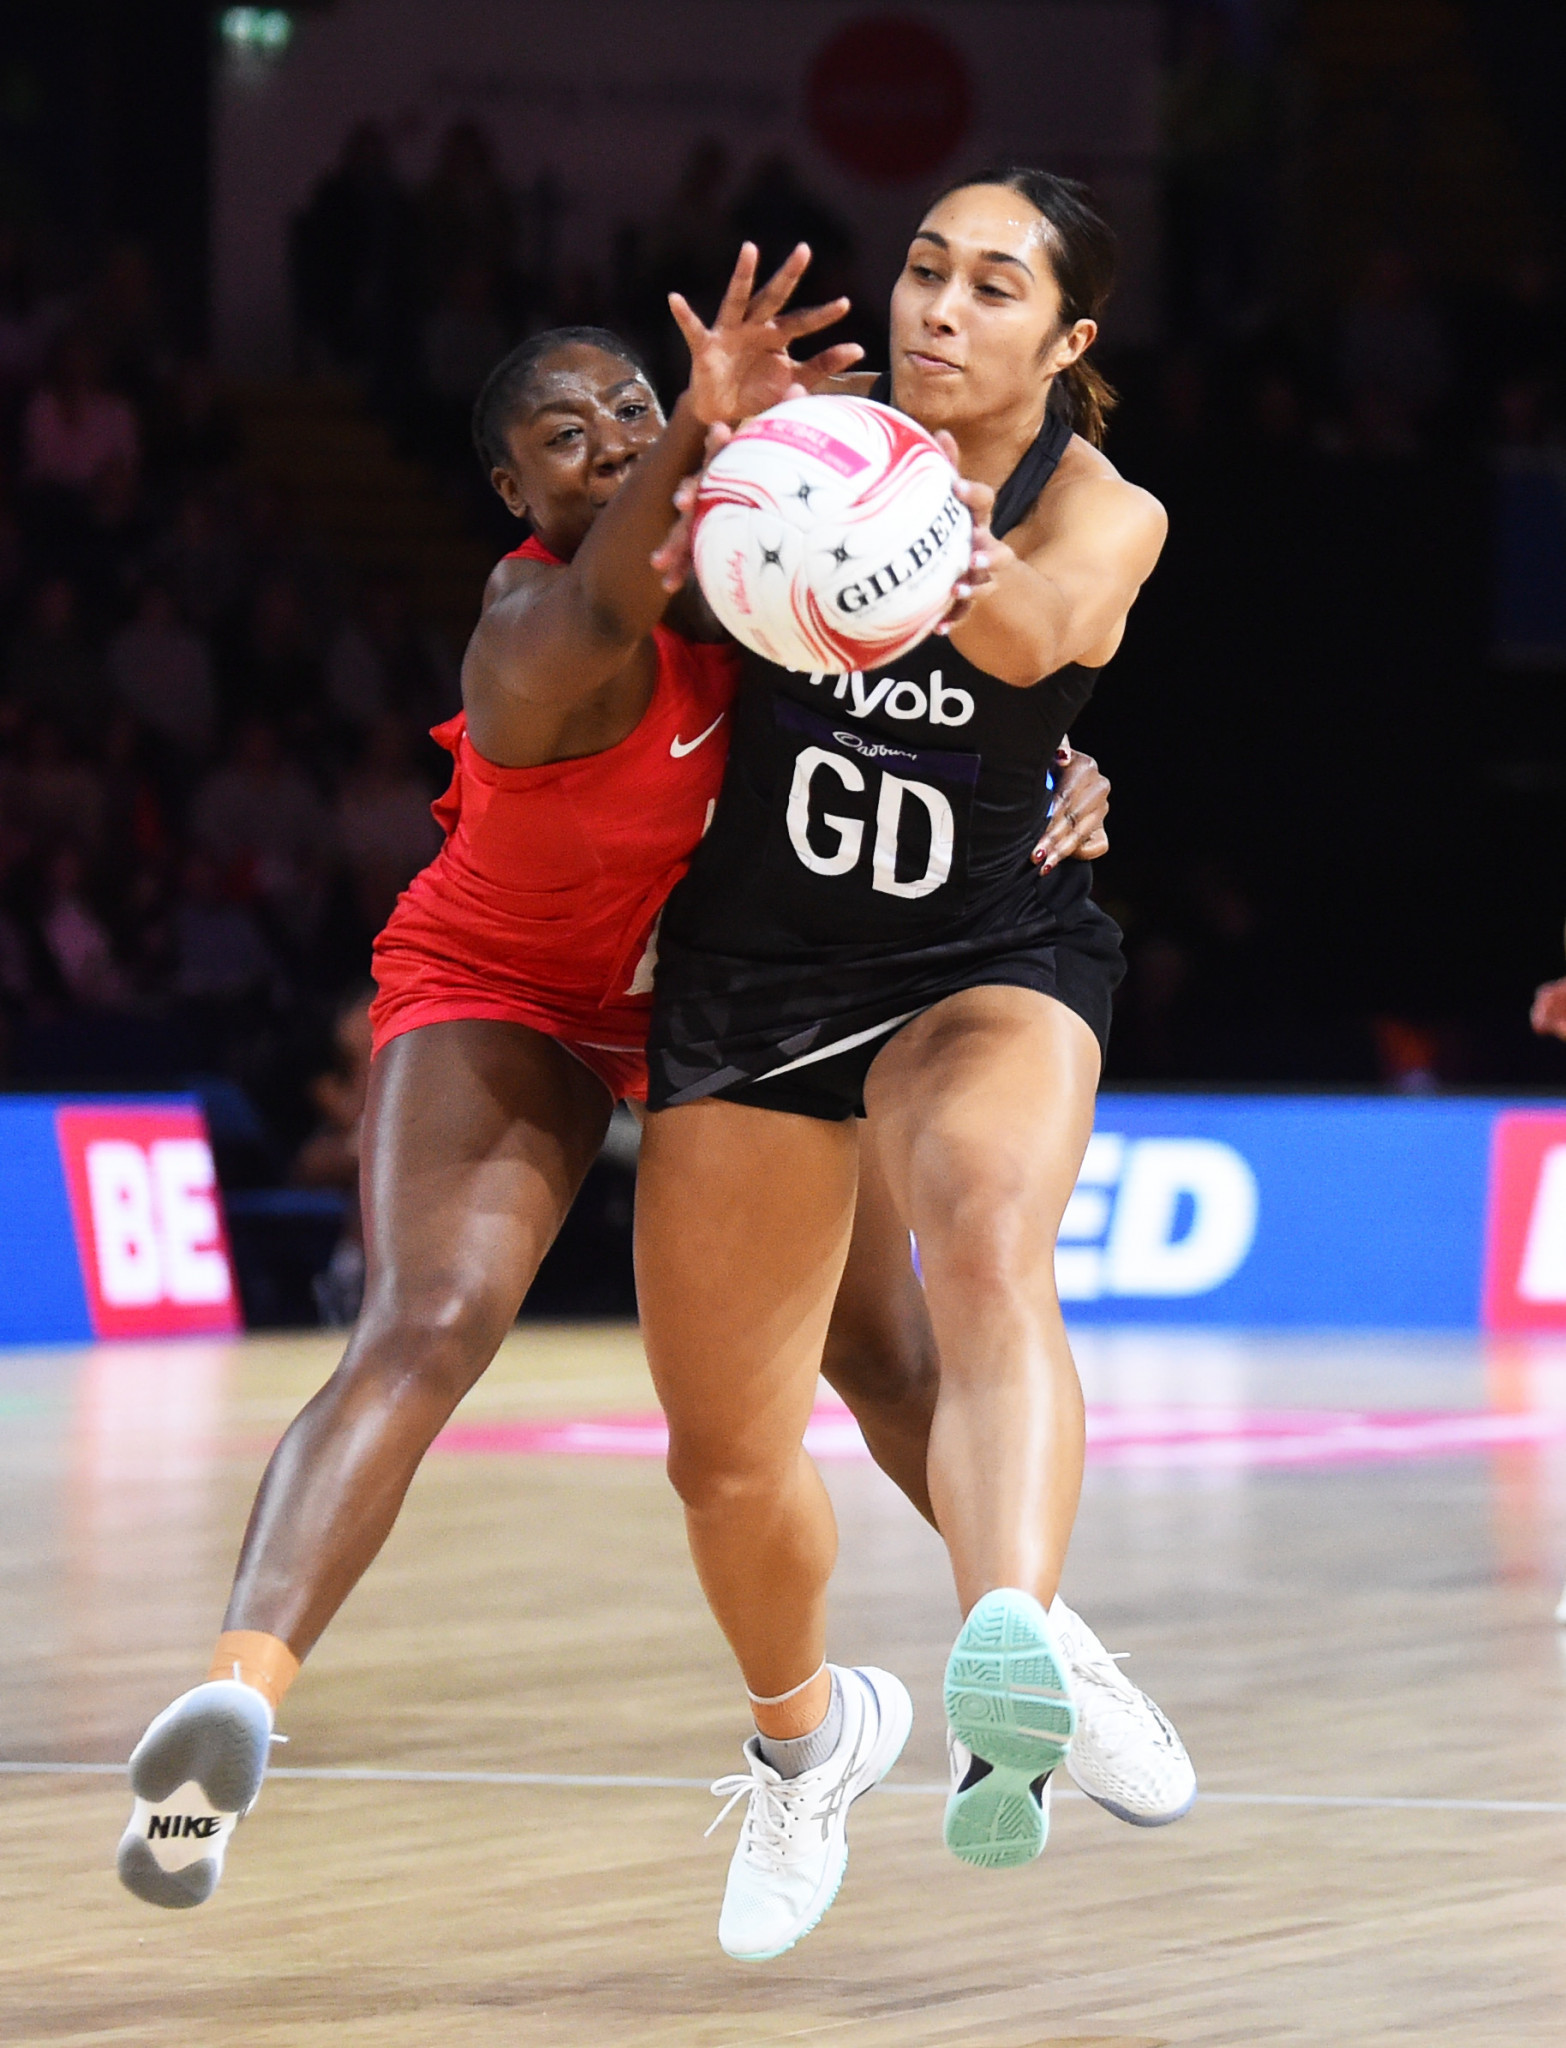 England beaten again by New Zealand as Netball Nations Cup opens